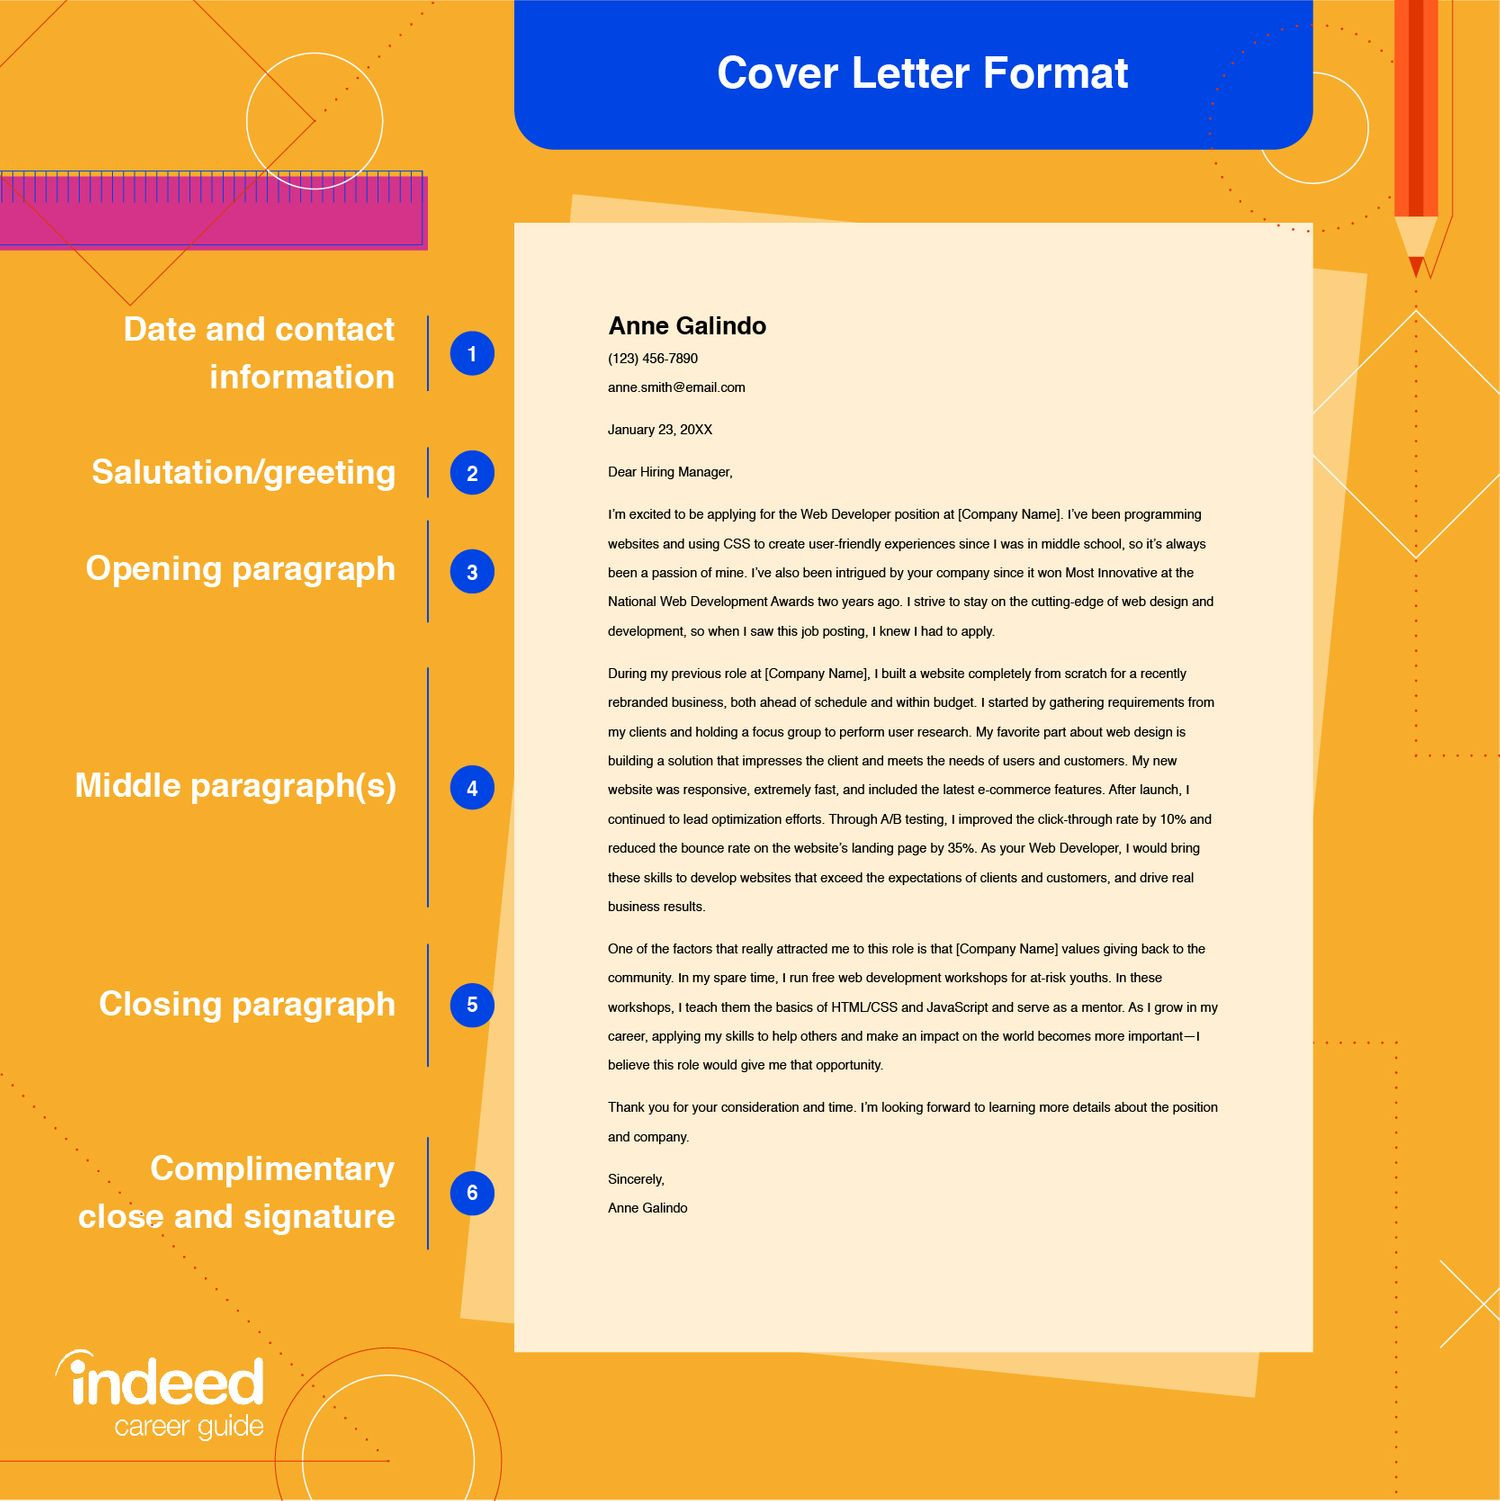 Email Content for Sending Resume Sample How to Send An Email Cover Letter (with Example) Indeed.com